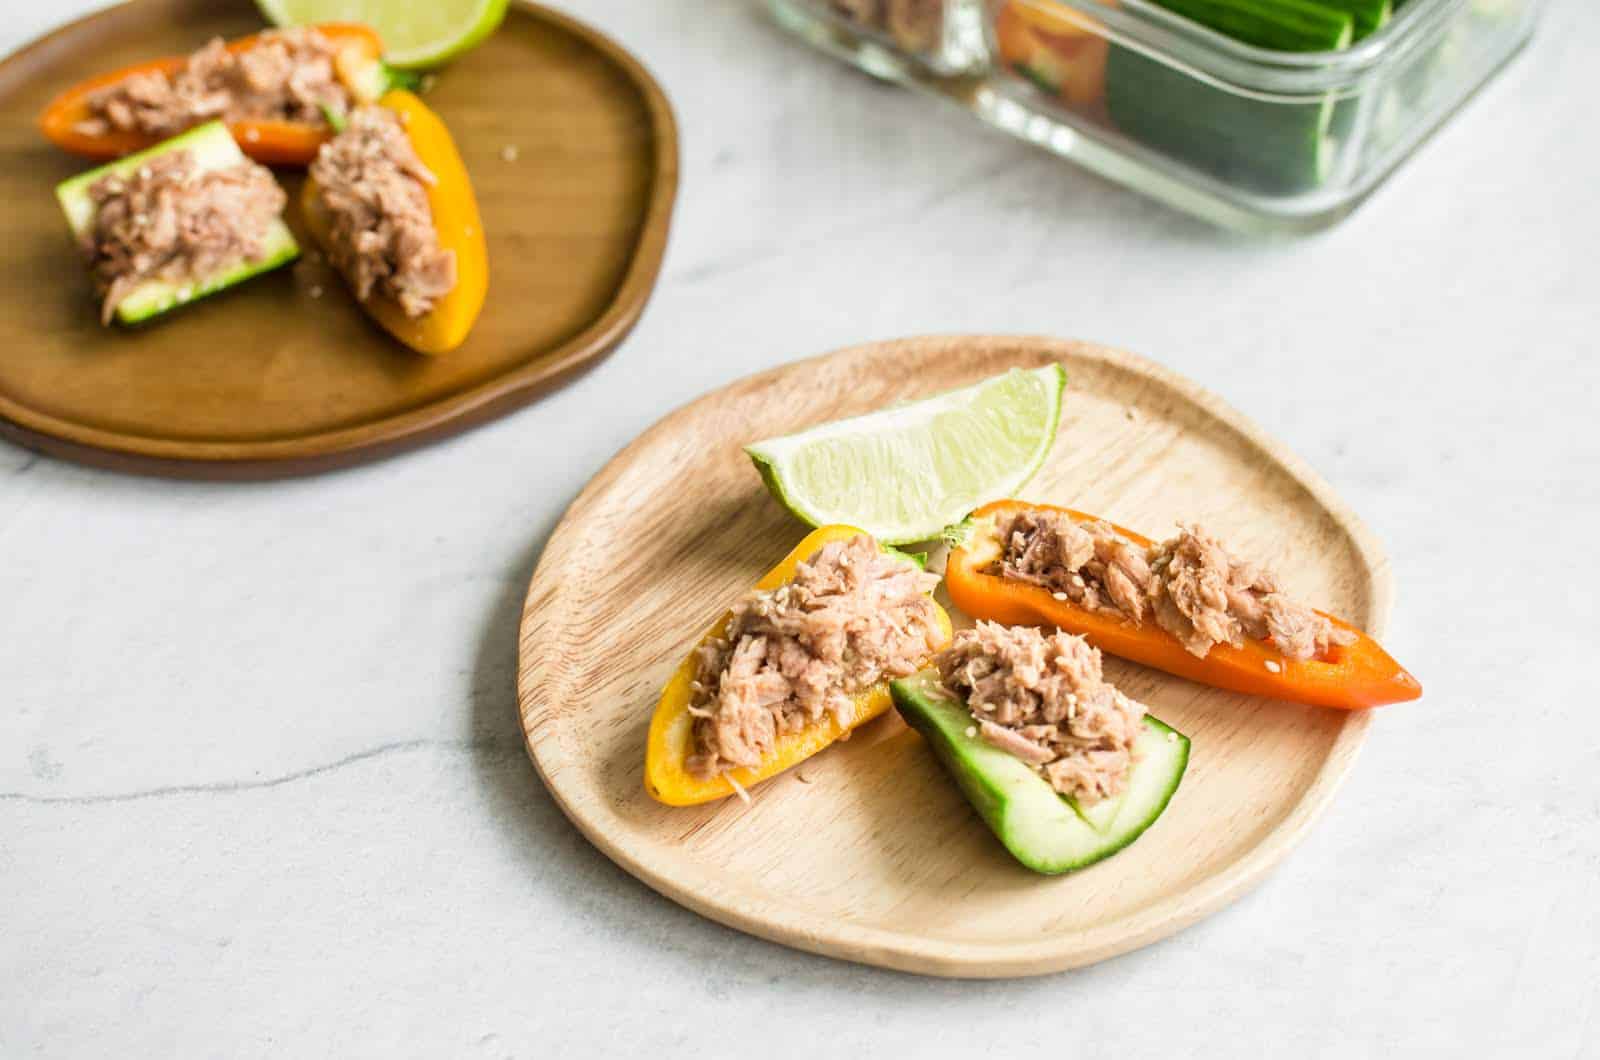 Wondering what to make with canned tuna? Look no further than these Spicy Tuna Veggie Boats - they're a super easy no-cook lunch idea with tons of flavor